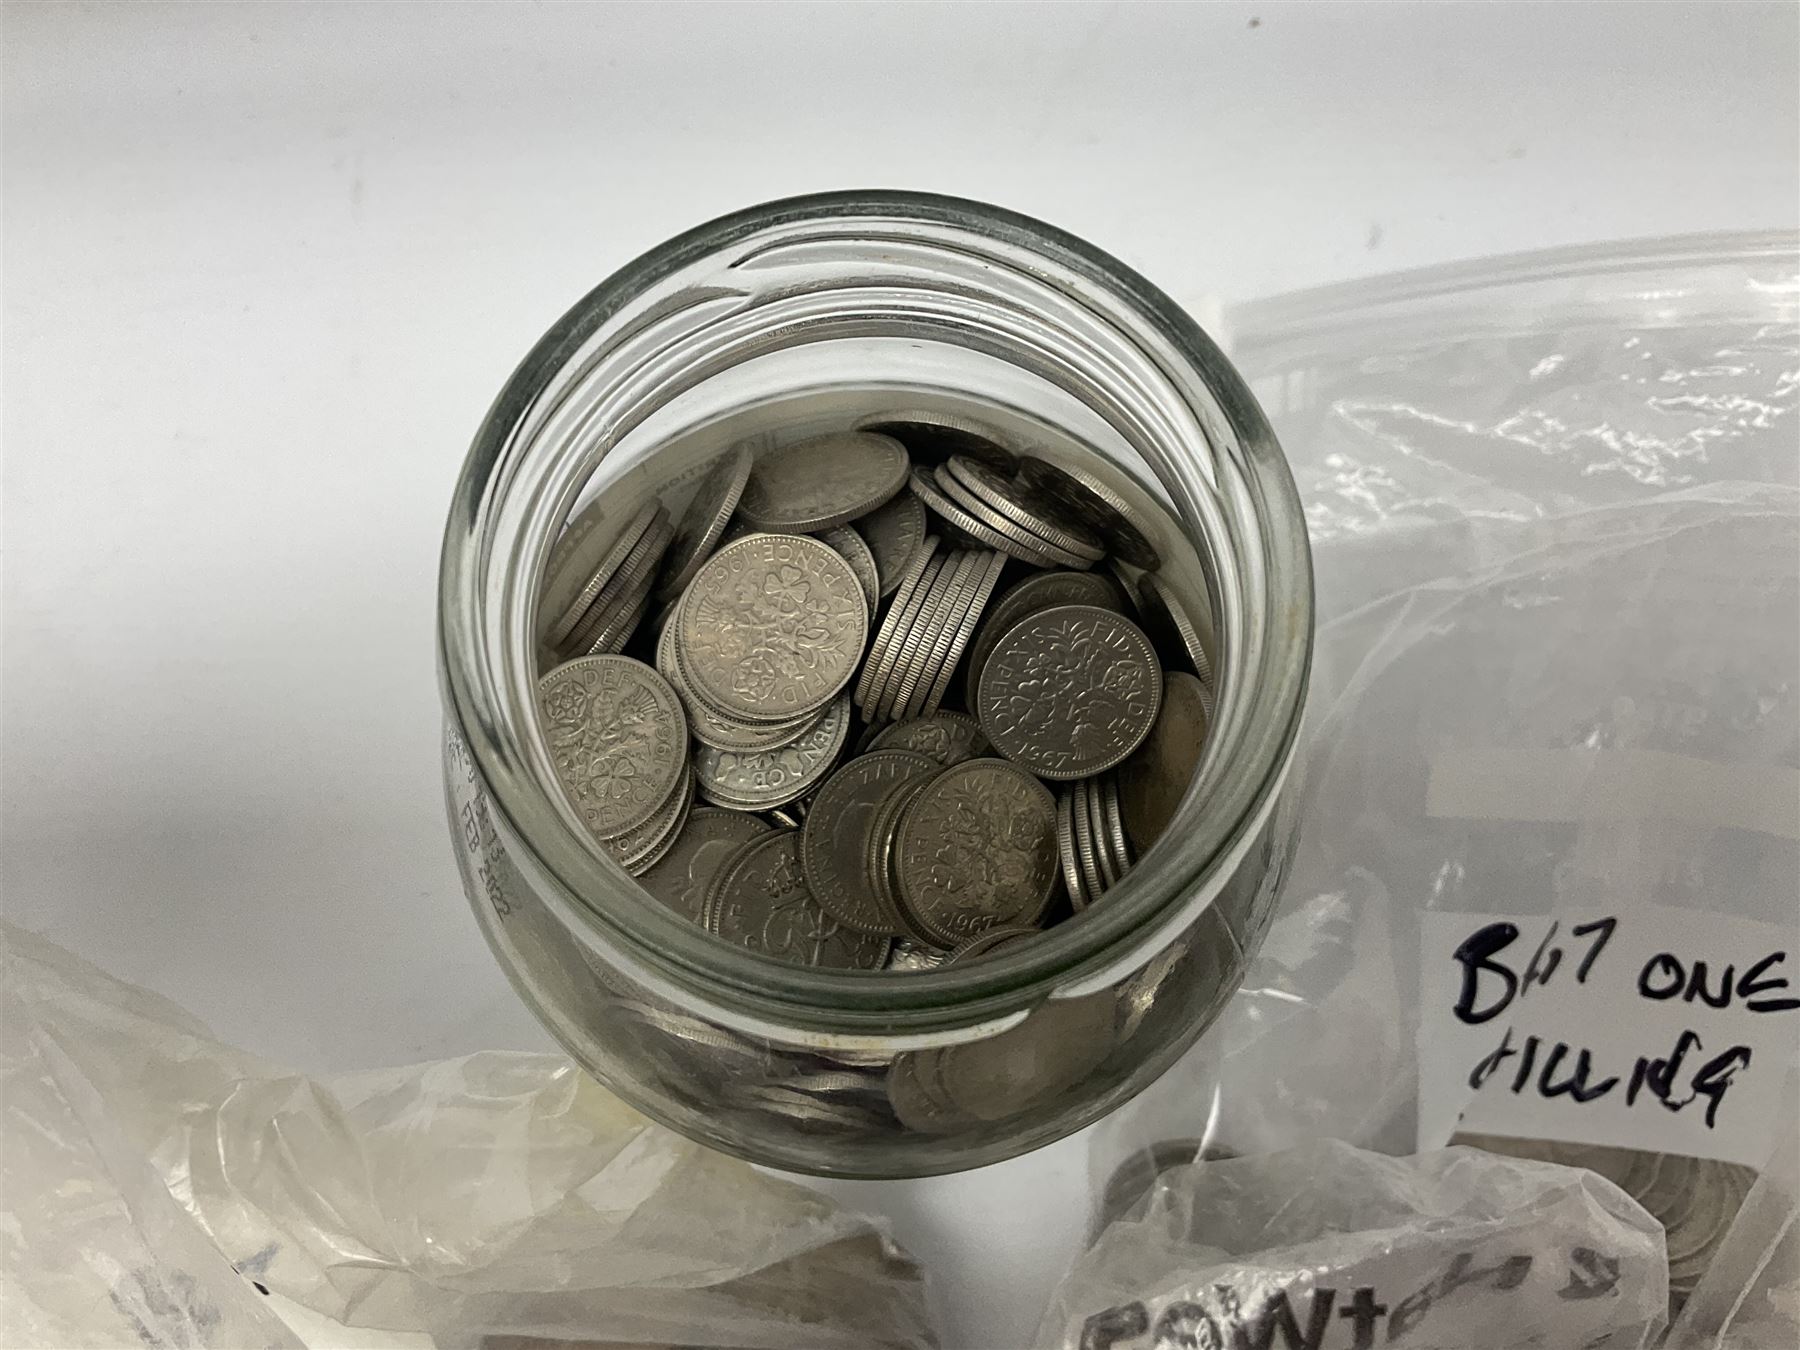 Mostly Great British pre-decimal coinage including pennies - Image 2 of 2